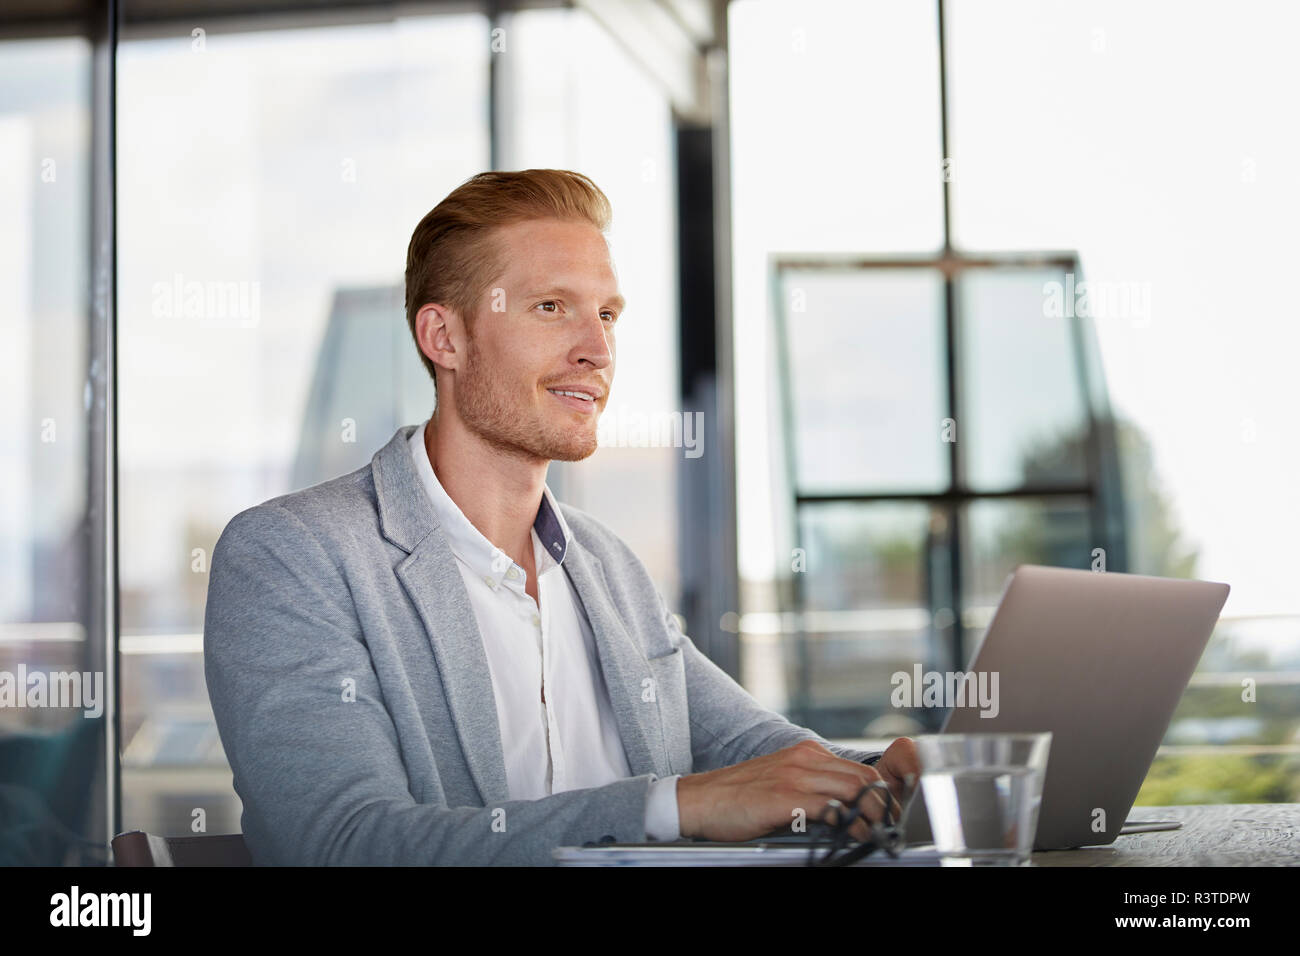 Smiling businessman with laptop on desk in office Banque D'Images